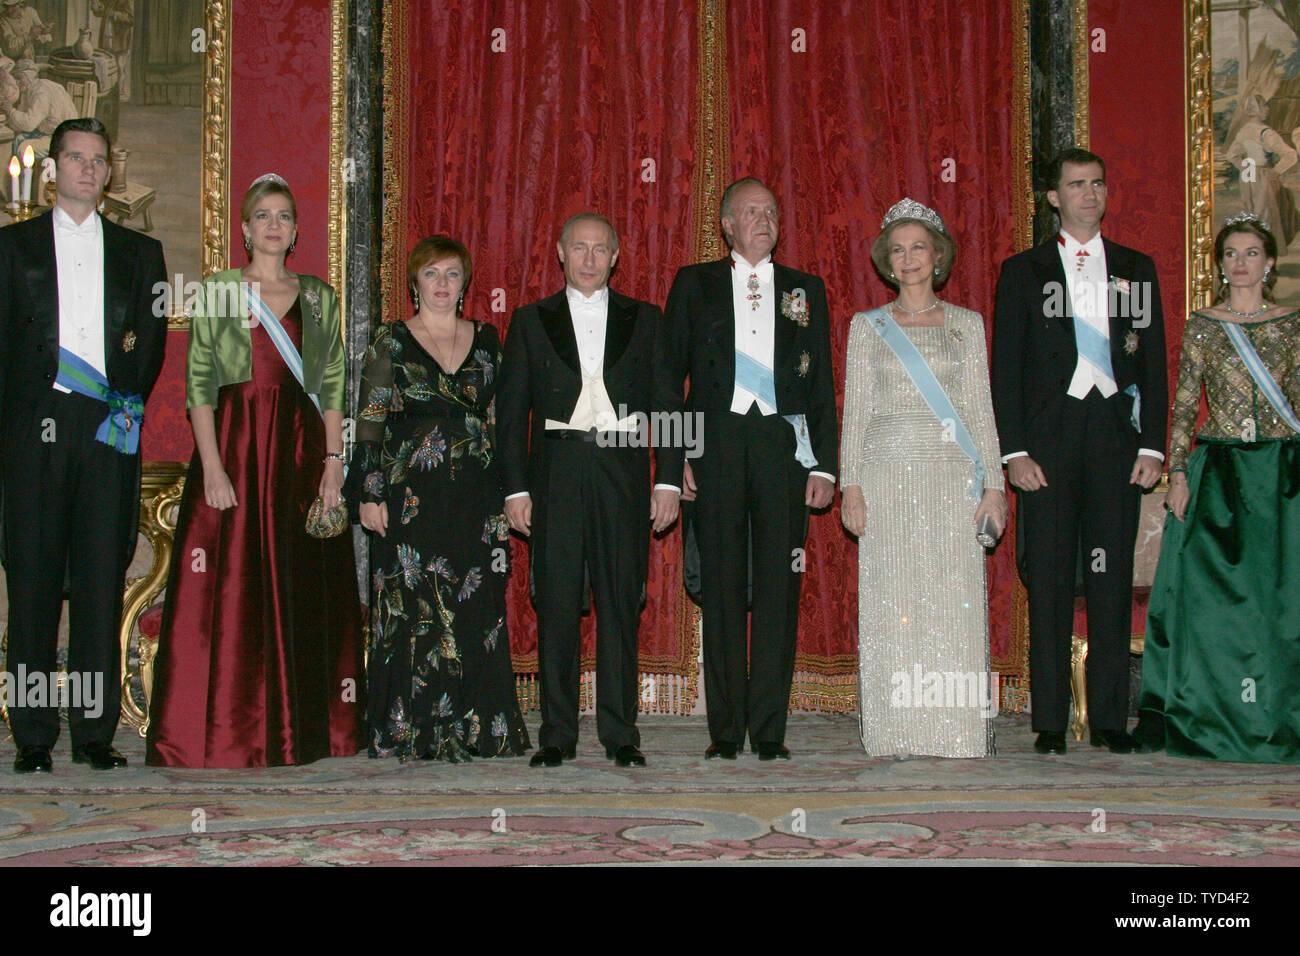 From left to right: Spanish Prince Inaki Urdangarin, his wife Cristina, Russian first lady Lyudmila Putin, Rusian President Vladimir Putin, King Juan Carlos, Queen Sofia, Prince Felipe and his wife Letizia pose for a photo before their private dinner at Royal Palace in Madrid, February 8, 2006. Putin is in Spain on a two-day state visit to discuss  international terrorism and Russian cooperation with international organizations to prevent terrorism. (UPI Photo/Anatoli Zhdanov) Stock Photo